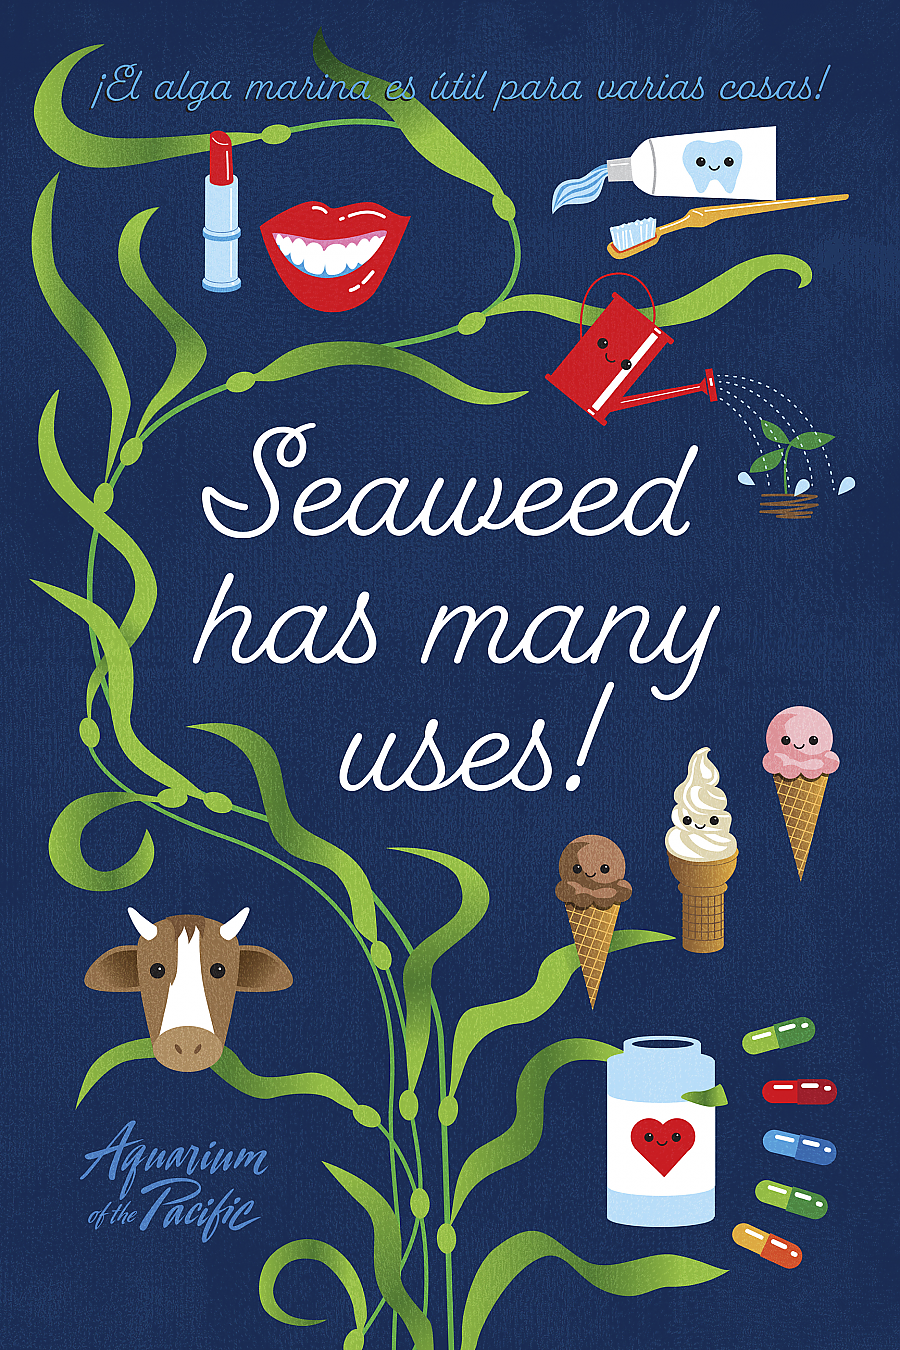 Seaweed can be used for ice cream, cow feeds, fertilizer, cosmetics, pharmaceuticals, and more.